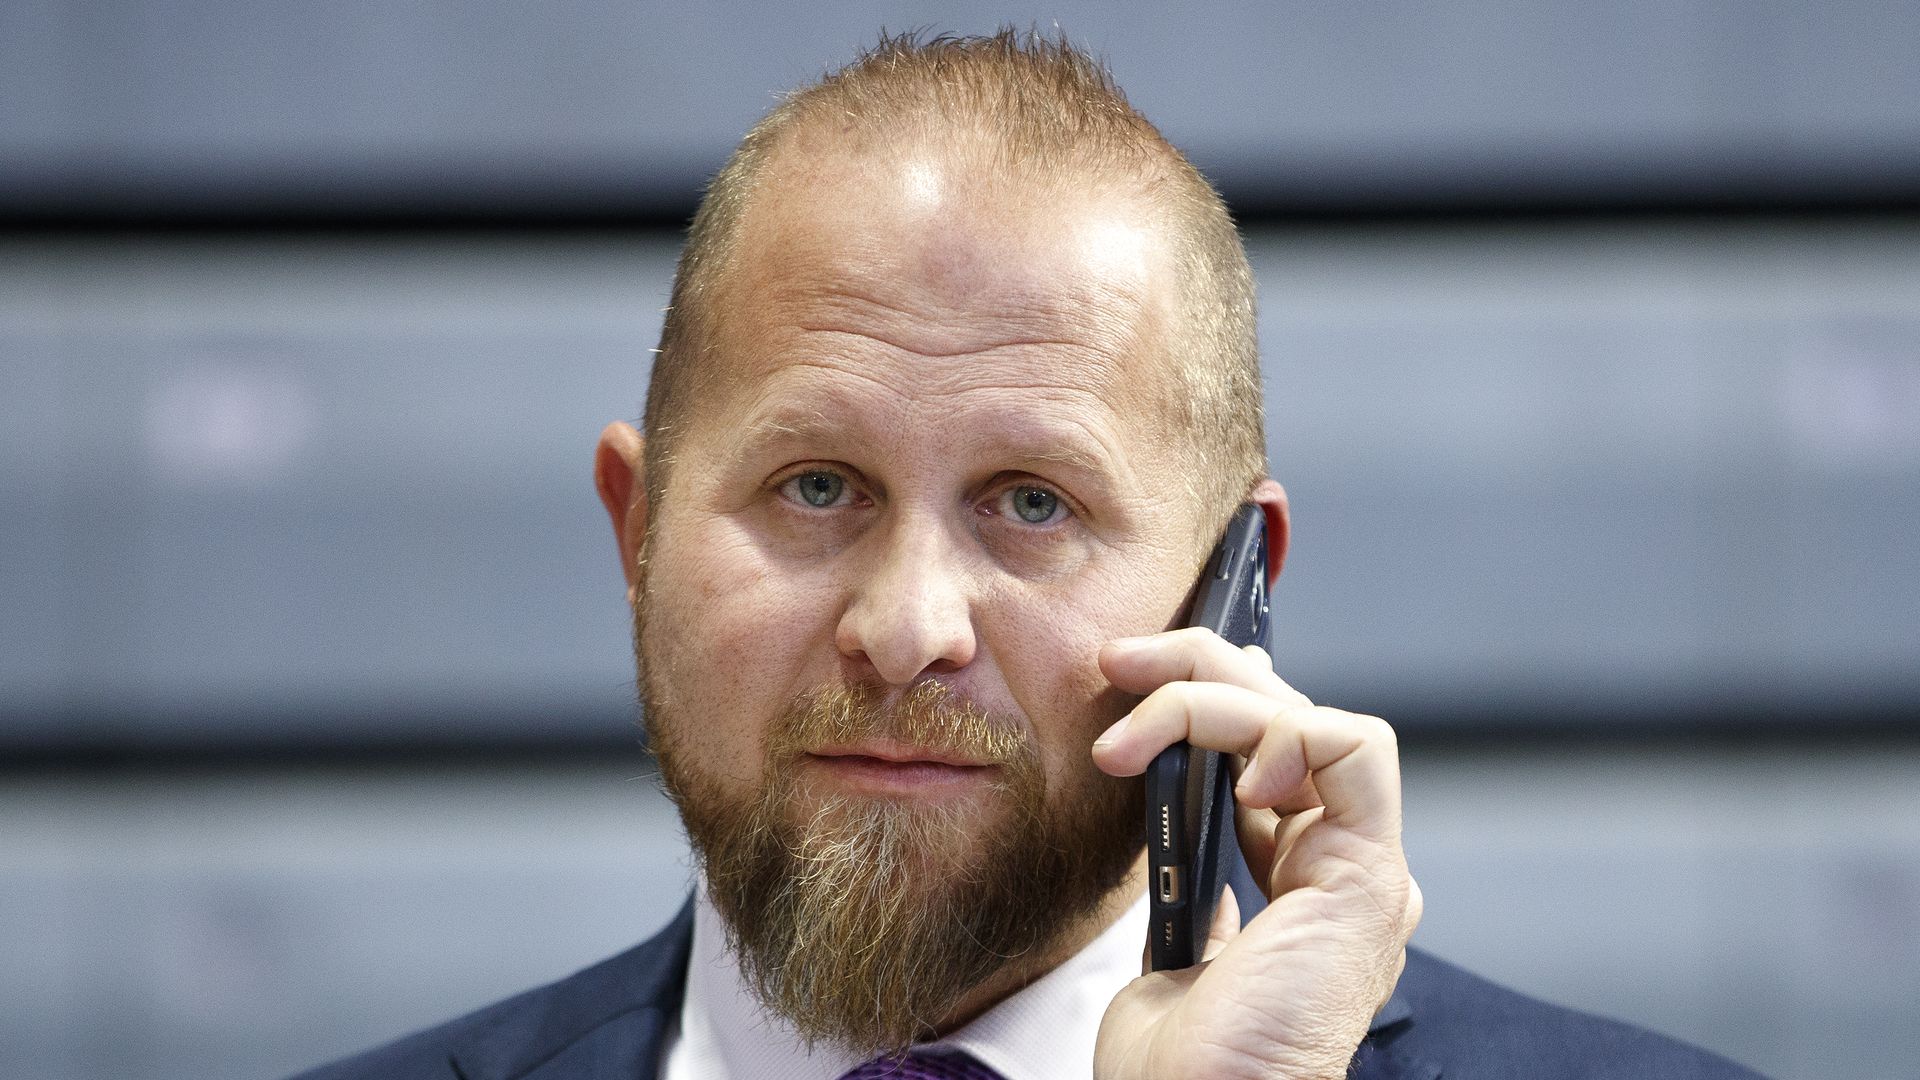  Brad Parscale, campaign manager for President Donald Trump's re-election campaign, speaks on the phone ahead a campaign rally inside of the Knapp Center arena at Drake University on January 30